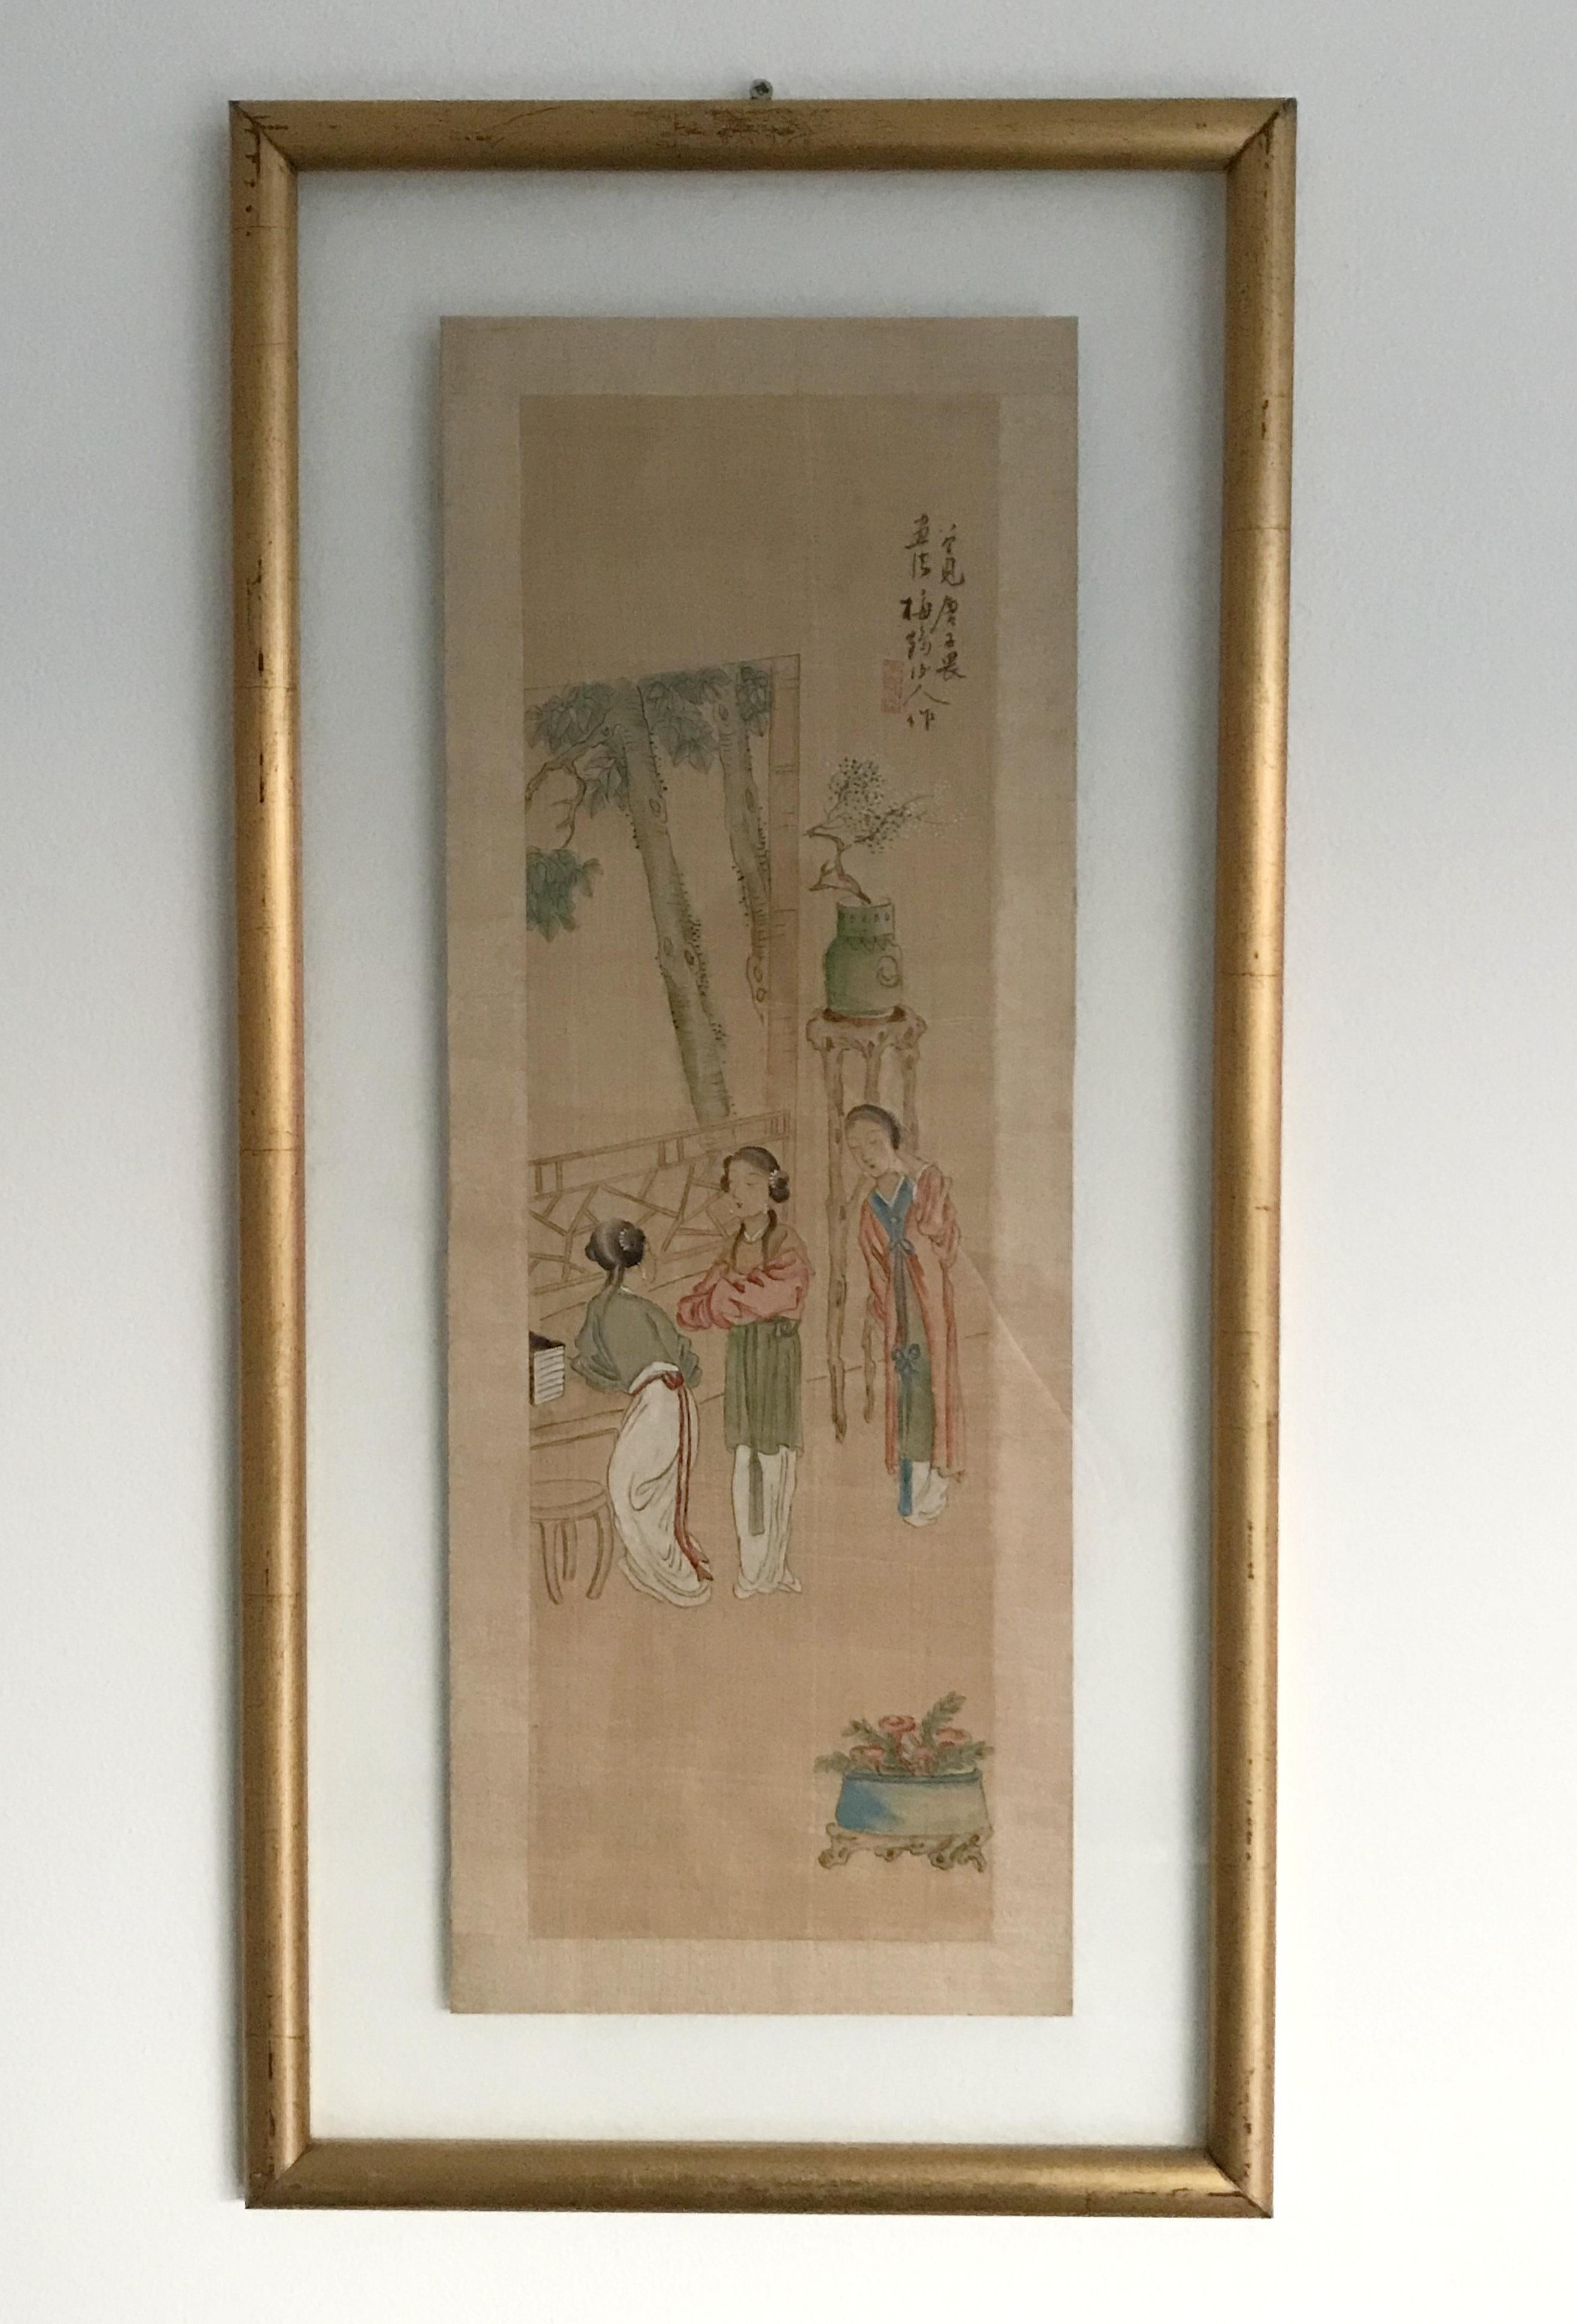 Antique Chinese watercolor painting on paper, enclosed in glass and gilt wood frame, early 20th century
Measures: height 27.5 inches, width 13.5 inches, depth 0.75 inches
1 in stock in Los Angeles
Order reference #: FABIOLTD F228